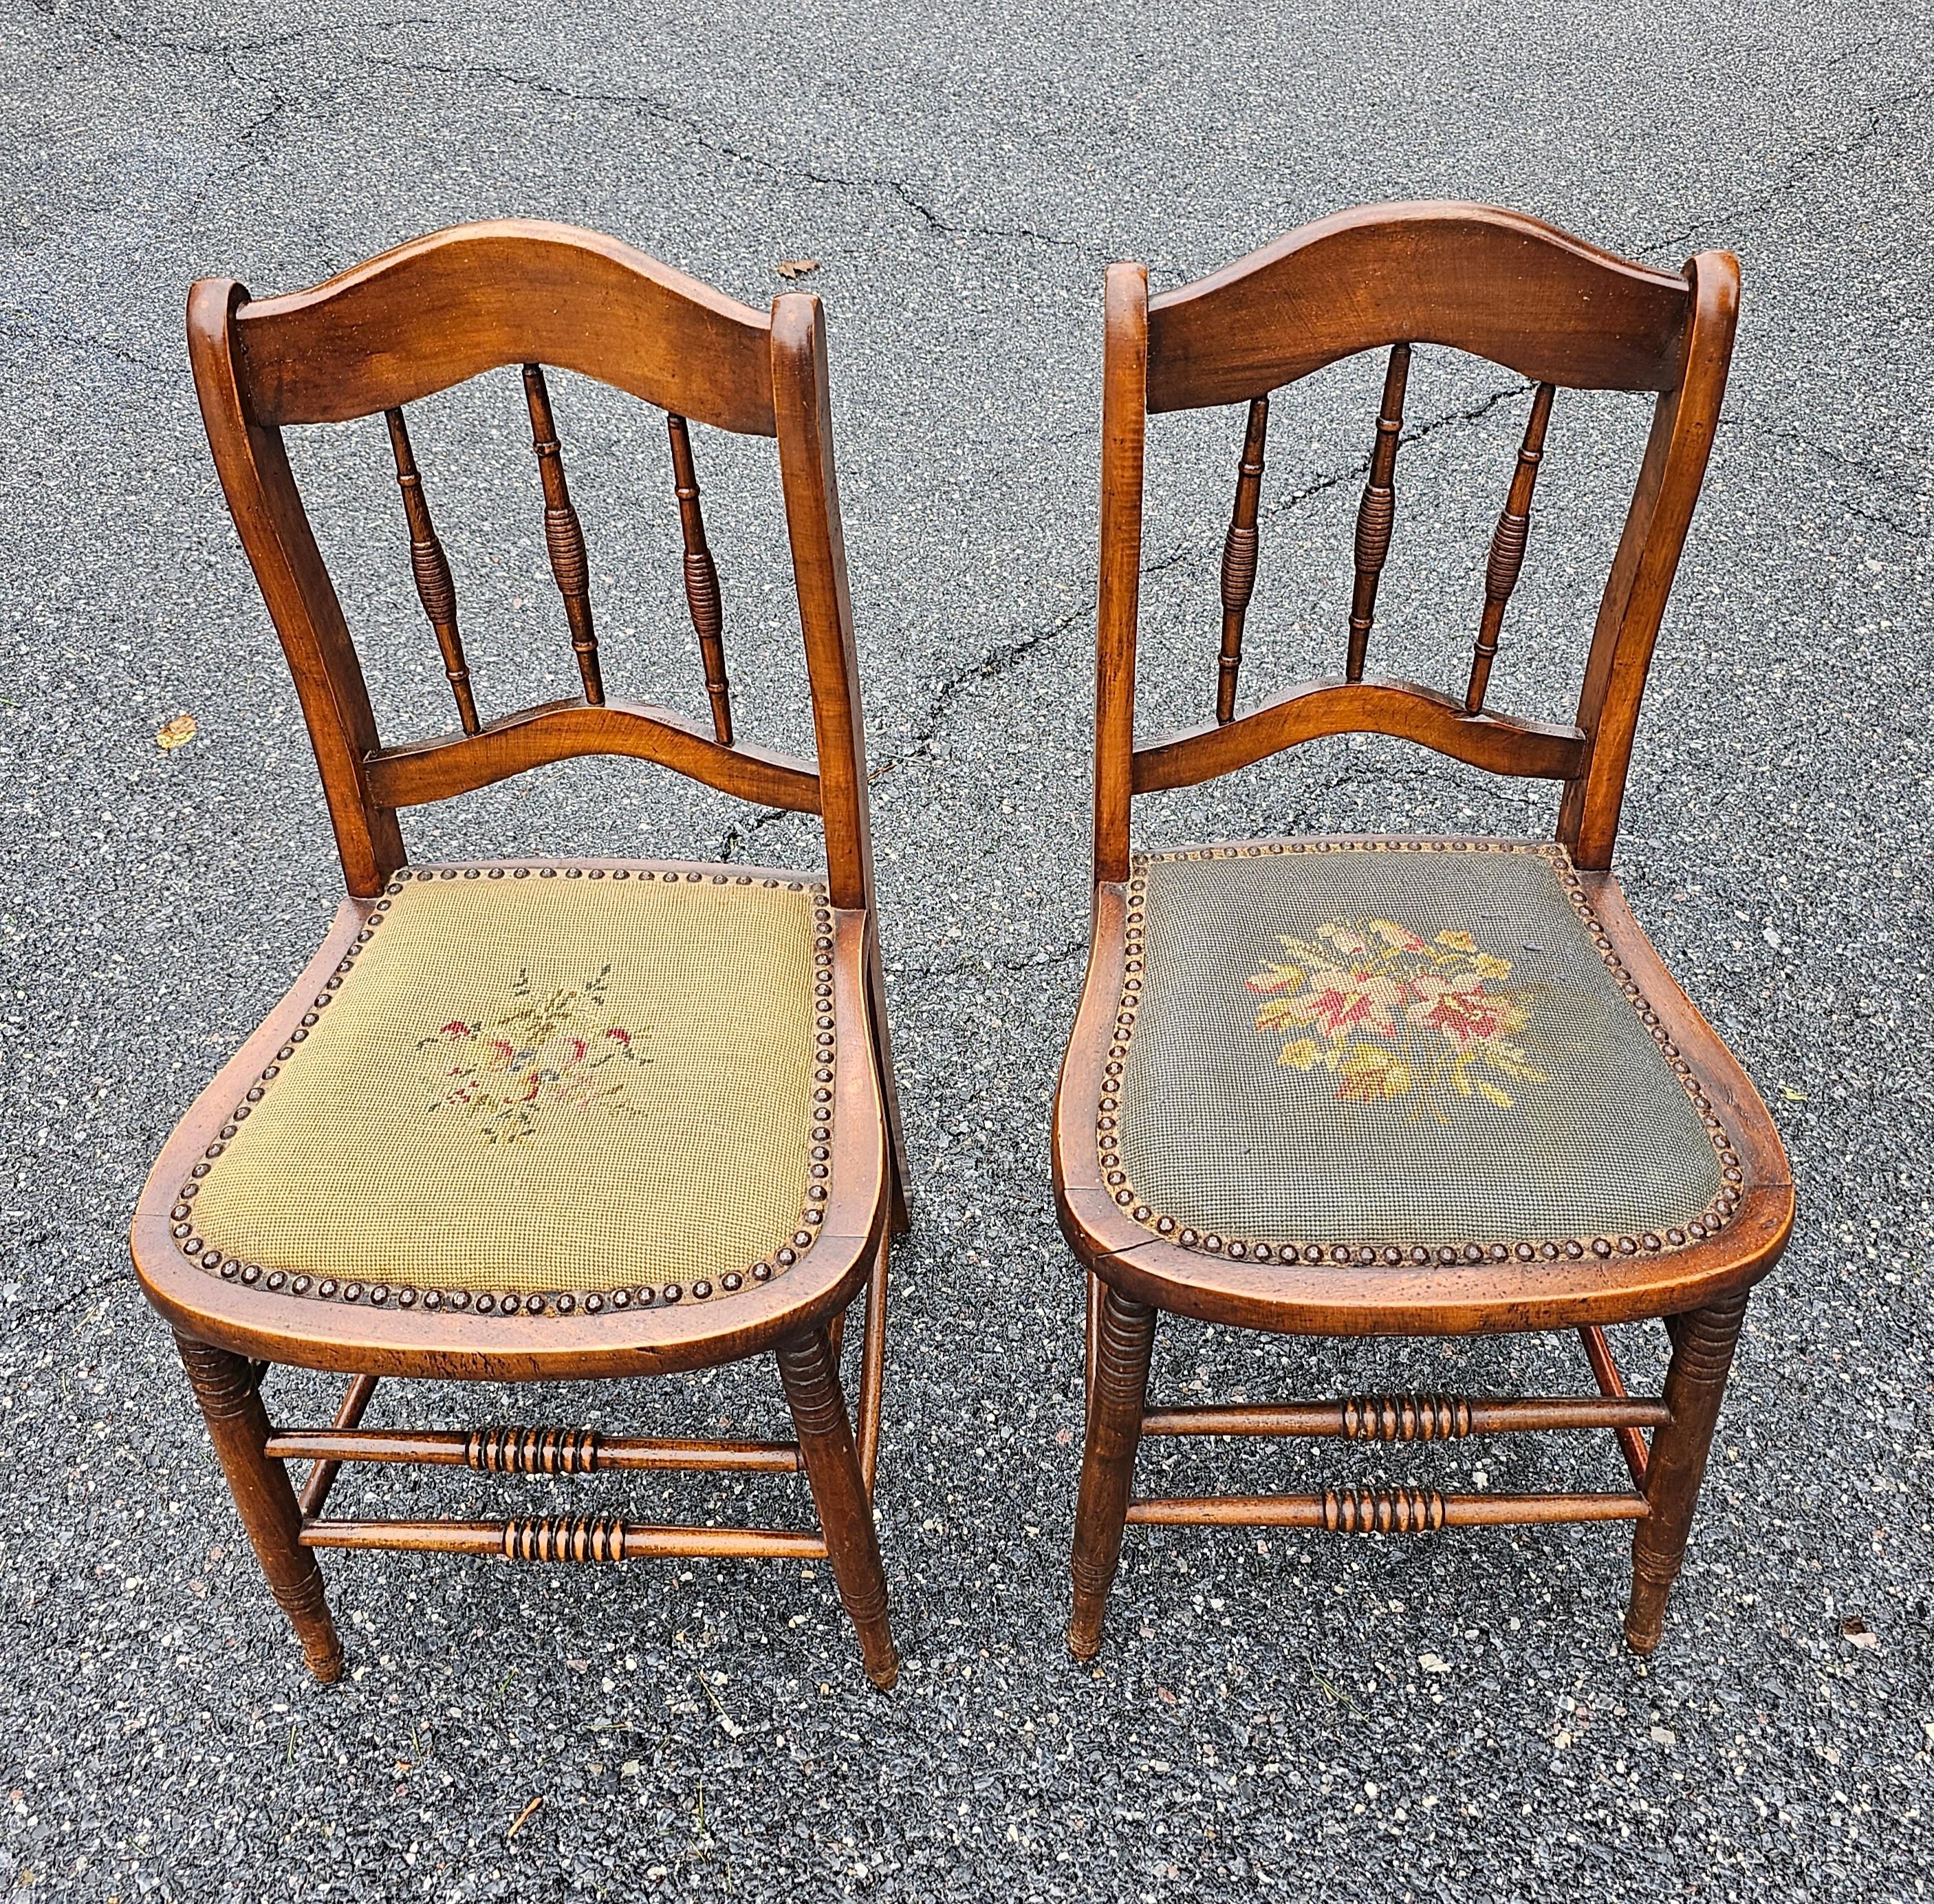 19th Century American Walnut and Needlepoint Upholstered Seat Side Chairs, Pair For Sale 3